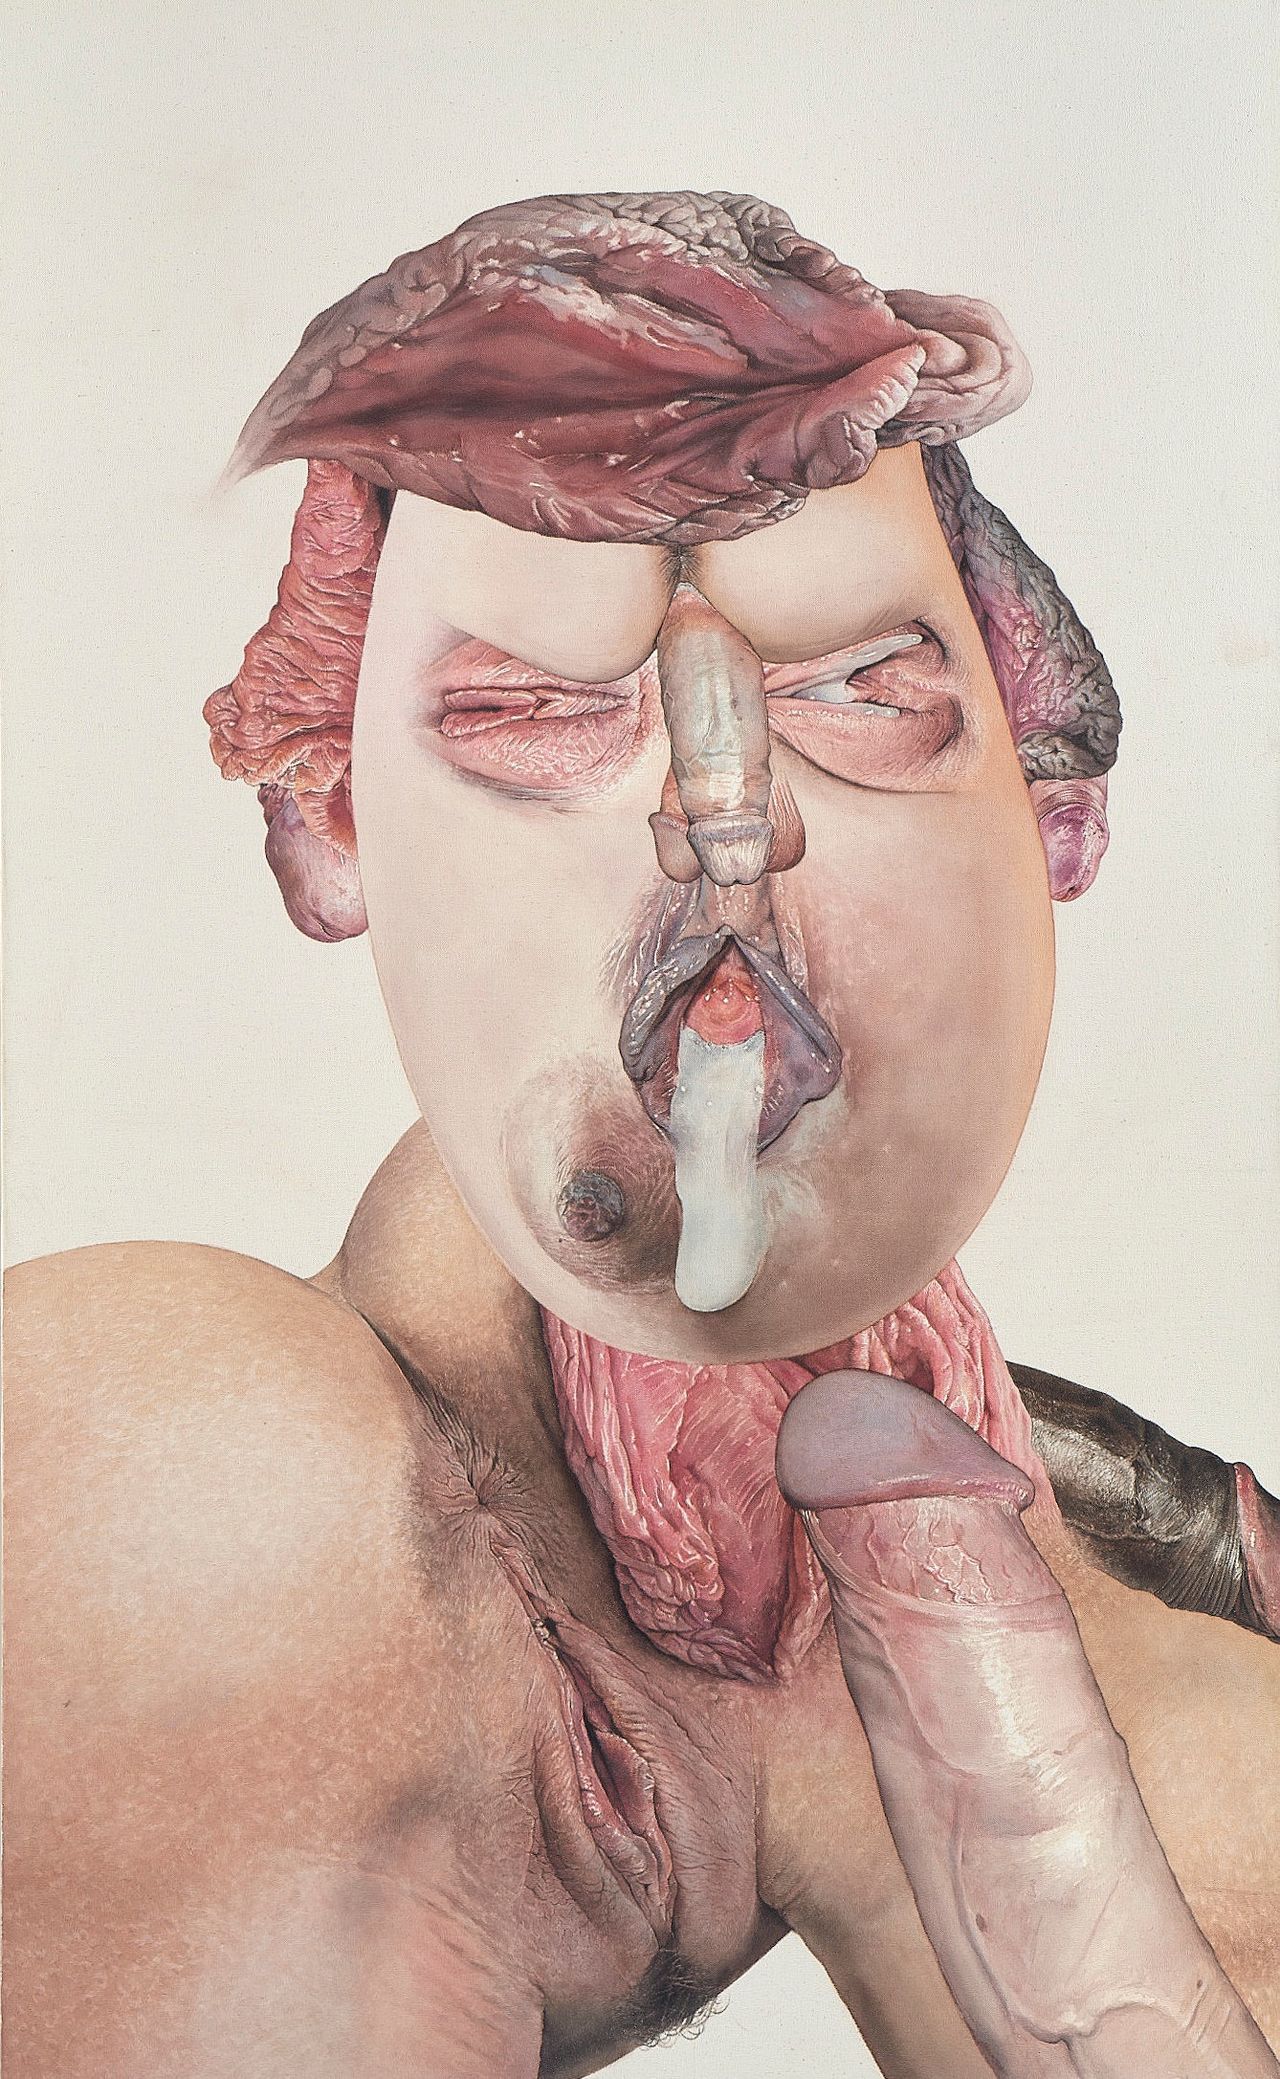 Alfred Steiner, "Why I Want to Fuck Donald Trump," 2016, watercolor on canvas, 60 x 37 inches (152.4 x 94 cm)